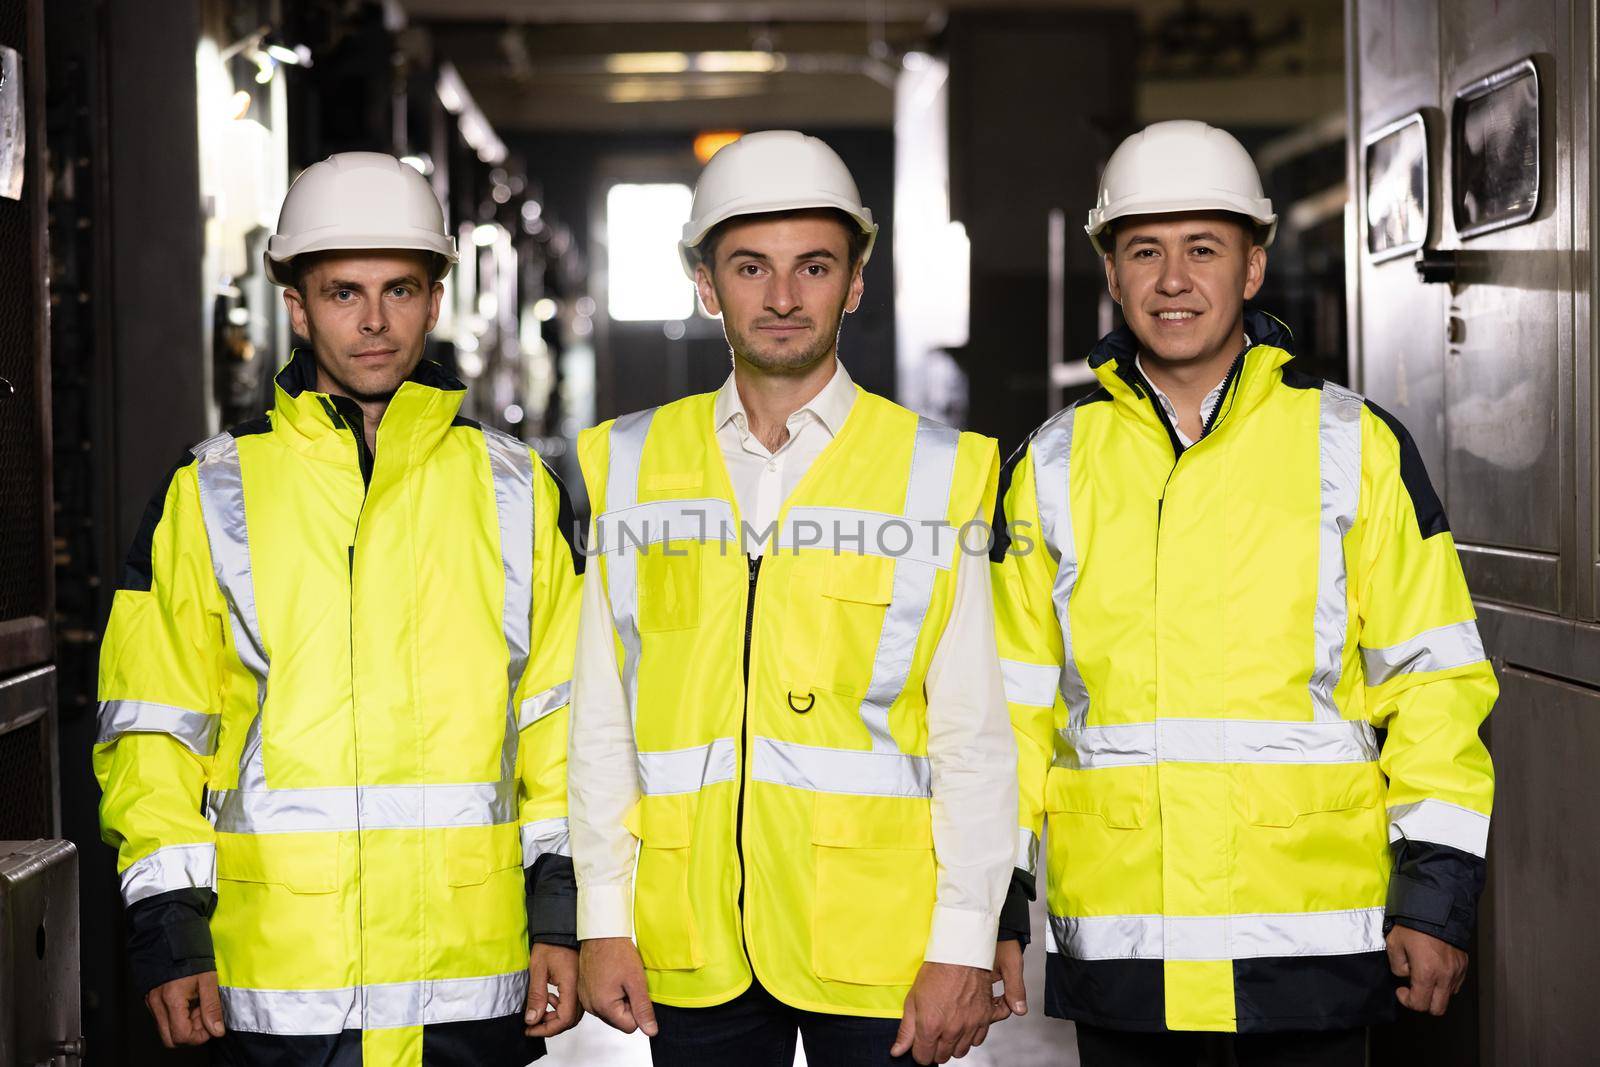 Portrait of group of professional telecommunication industry engineers smiles and looks at the camera . Workers wearing safety uniform and hard hat on unfocused background.